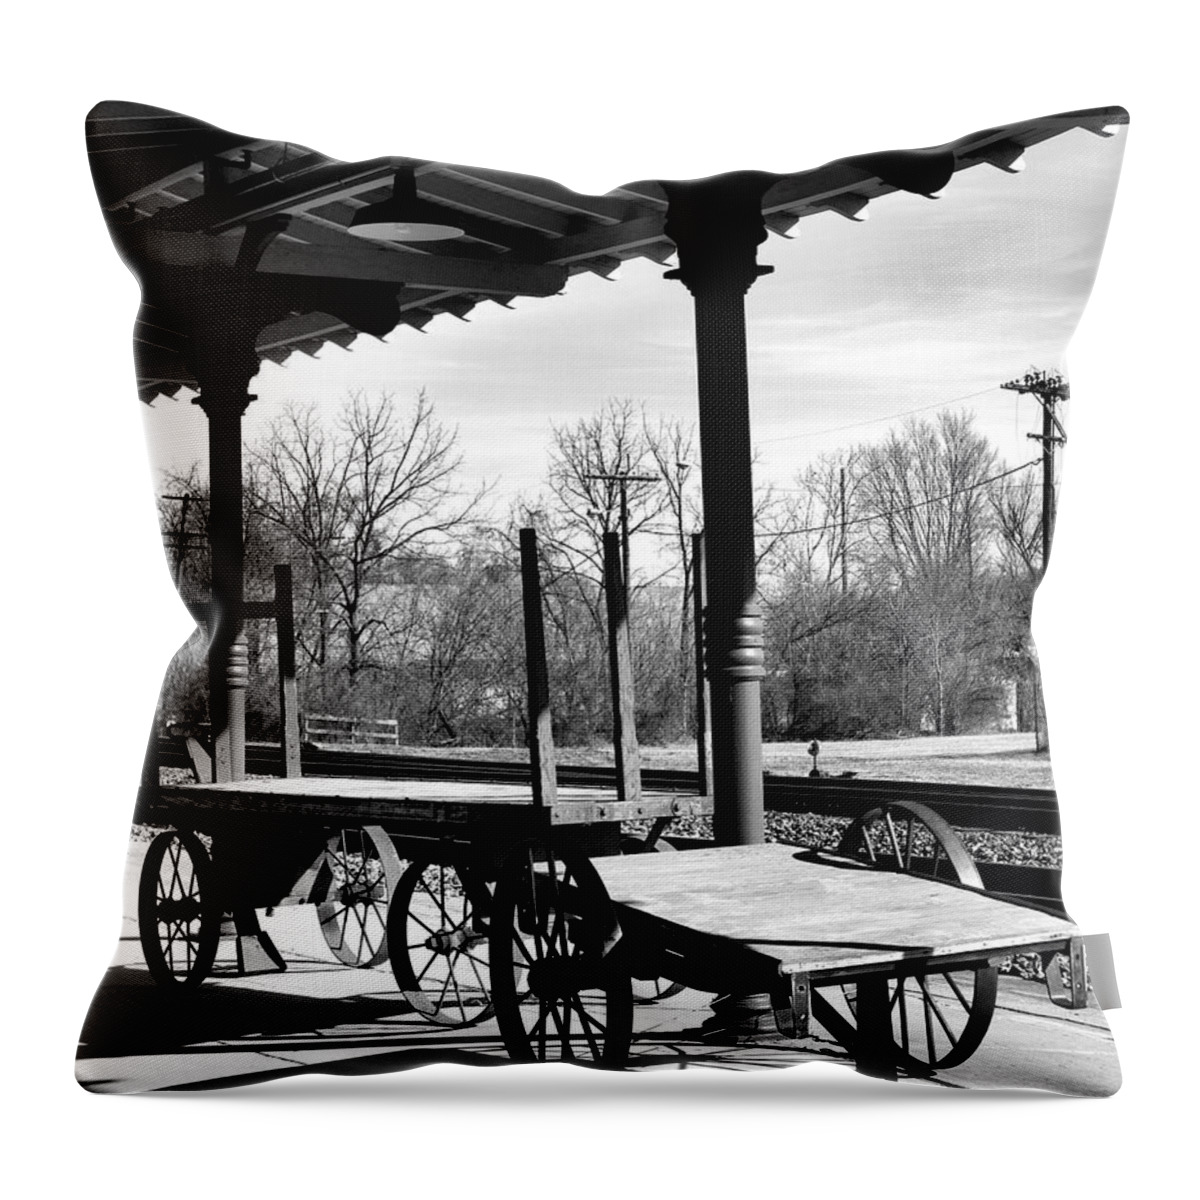 Bristol Throw Pillow featuring the photograph Railroad wagons in black and white by Denise Beverly